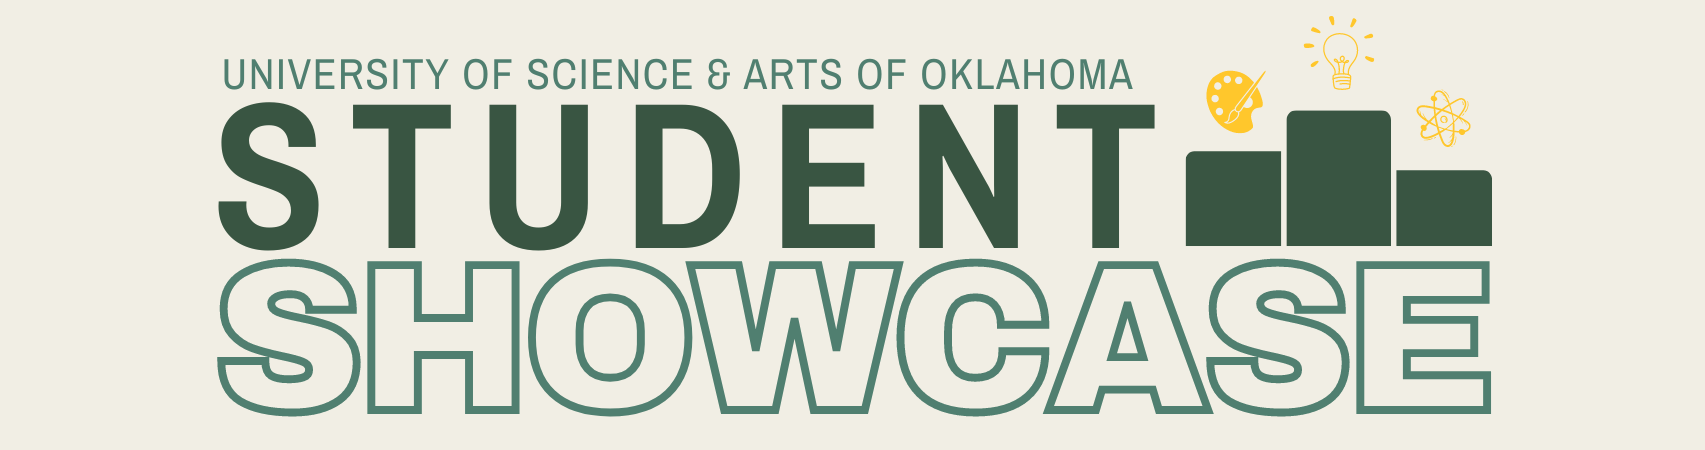 Student Showcase, with winners podium topped by icons representing art, ideas, and science